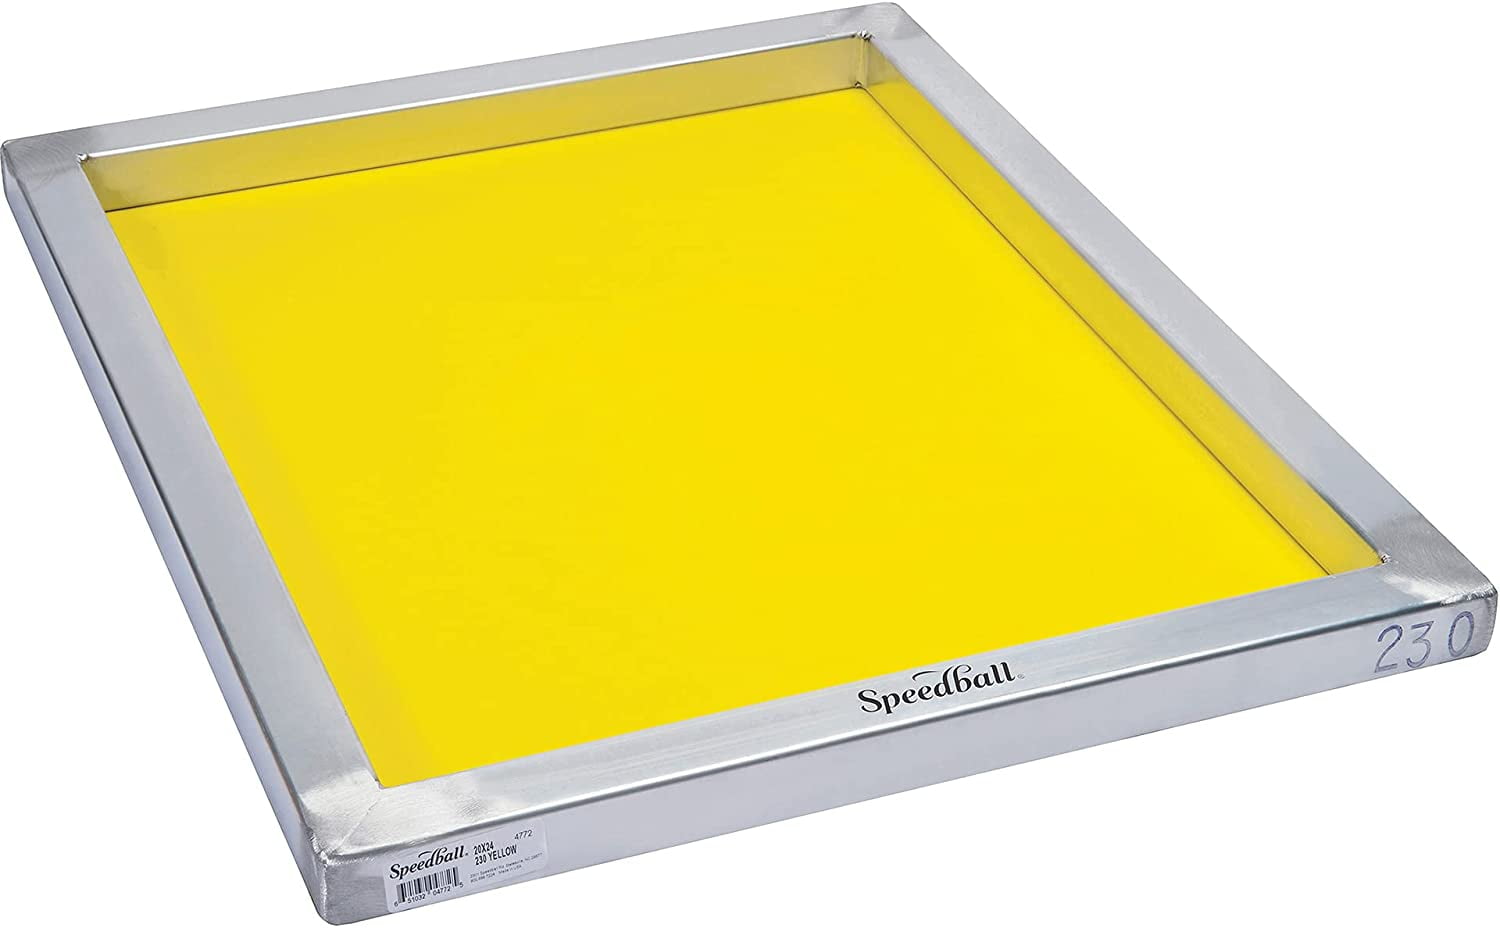 6pcs 23" X 31" Aluminum Frame Silk Screen Printing Screens With 230 Yellow Mesh for sale online 